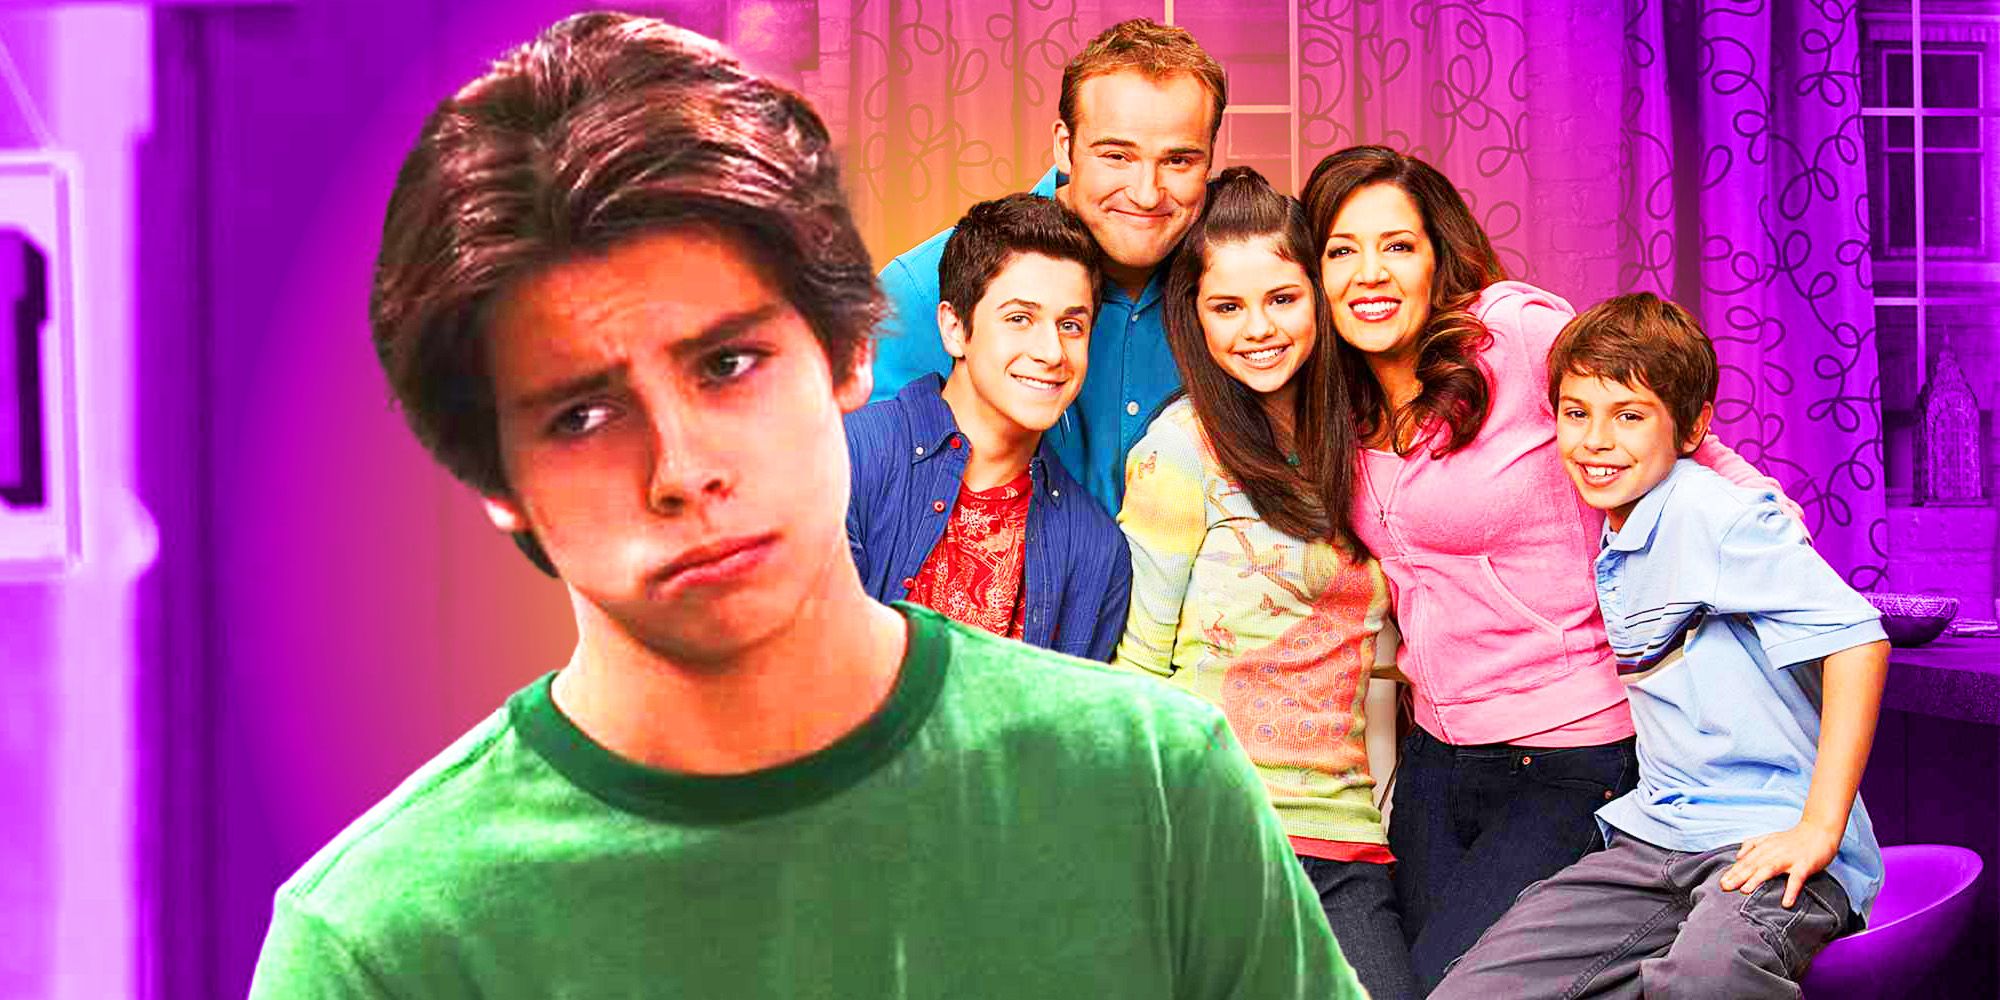 A composite image of Jake T. Austin and the cast from Wizards of Waverly Place